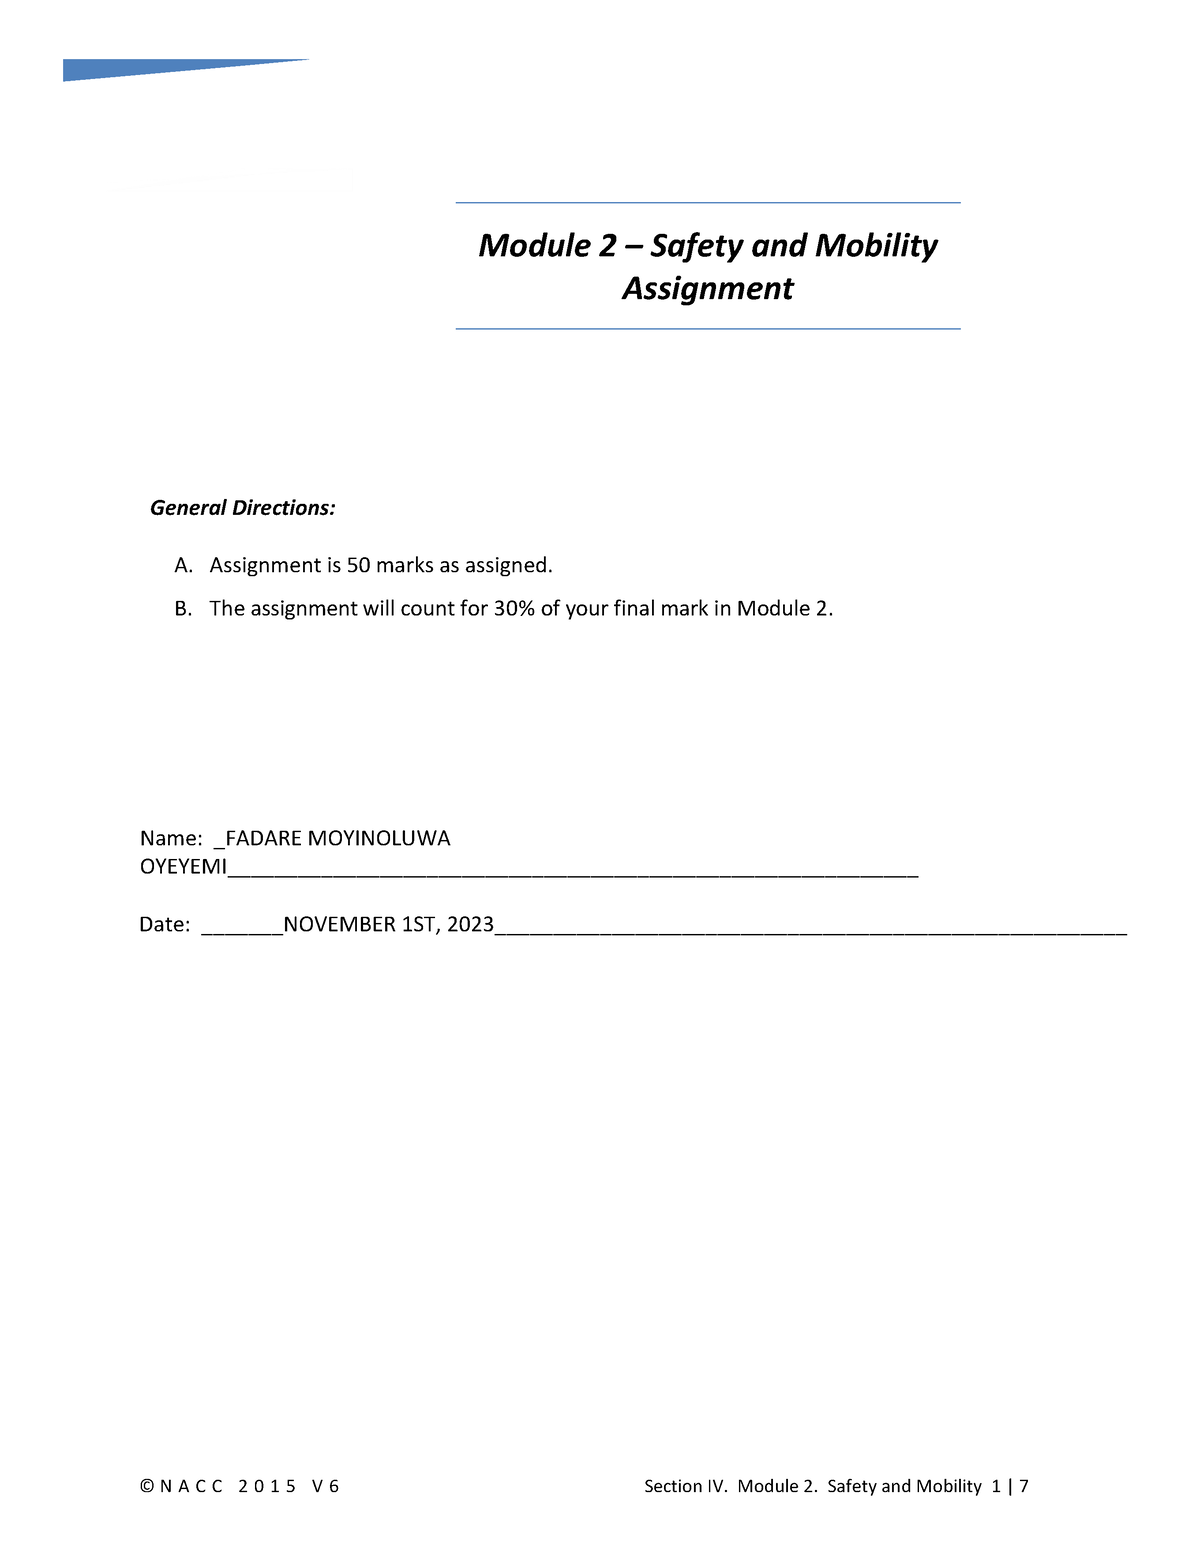 safety and mobility assignment psw